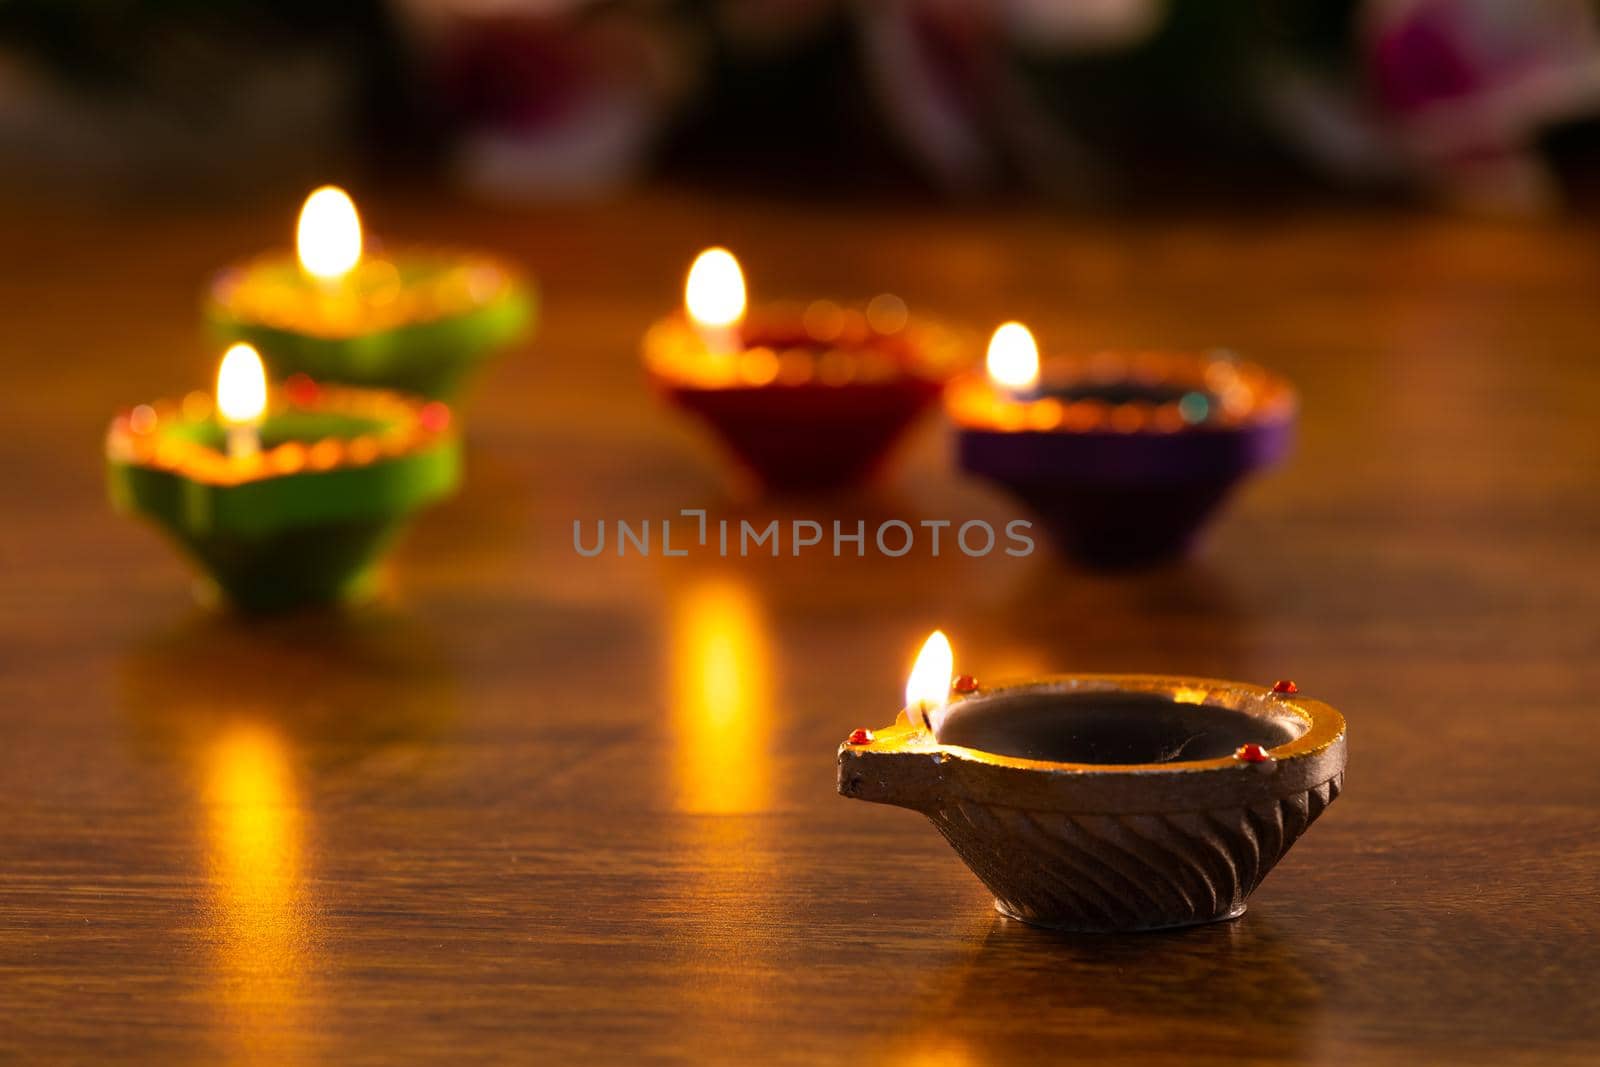 Four lit candles in small decorative clay pots burning on wooden table top. celebration, religion, tradition and ceremony concept.